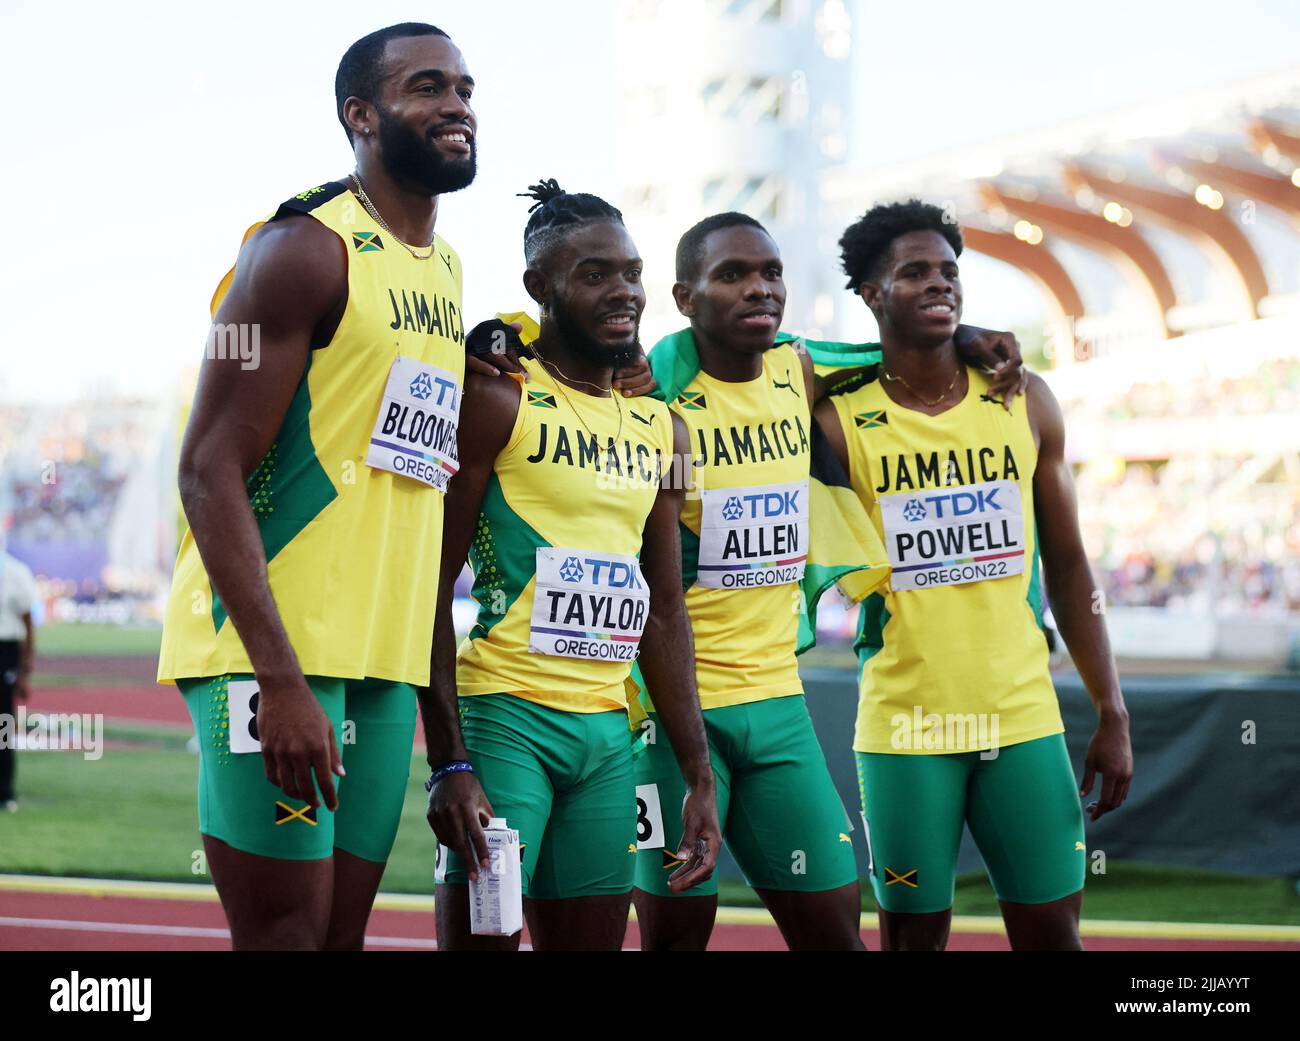 Athletics - World Athletics Championships - Men's 4x400 Metres Relay - Final - Hayward Field, Eugene, Oregon, U.S. - July 24, 2022 Jamaica's Akeem Bloomfield, Christopher Taylor, Nathon Allen and Jevaughn Powell pose after finishing the men's 4x400 metres final in second place REUTERS/Lucy Nicholson Stock Photo